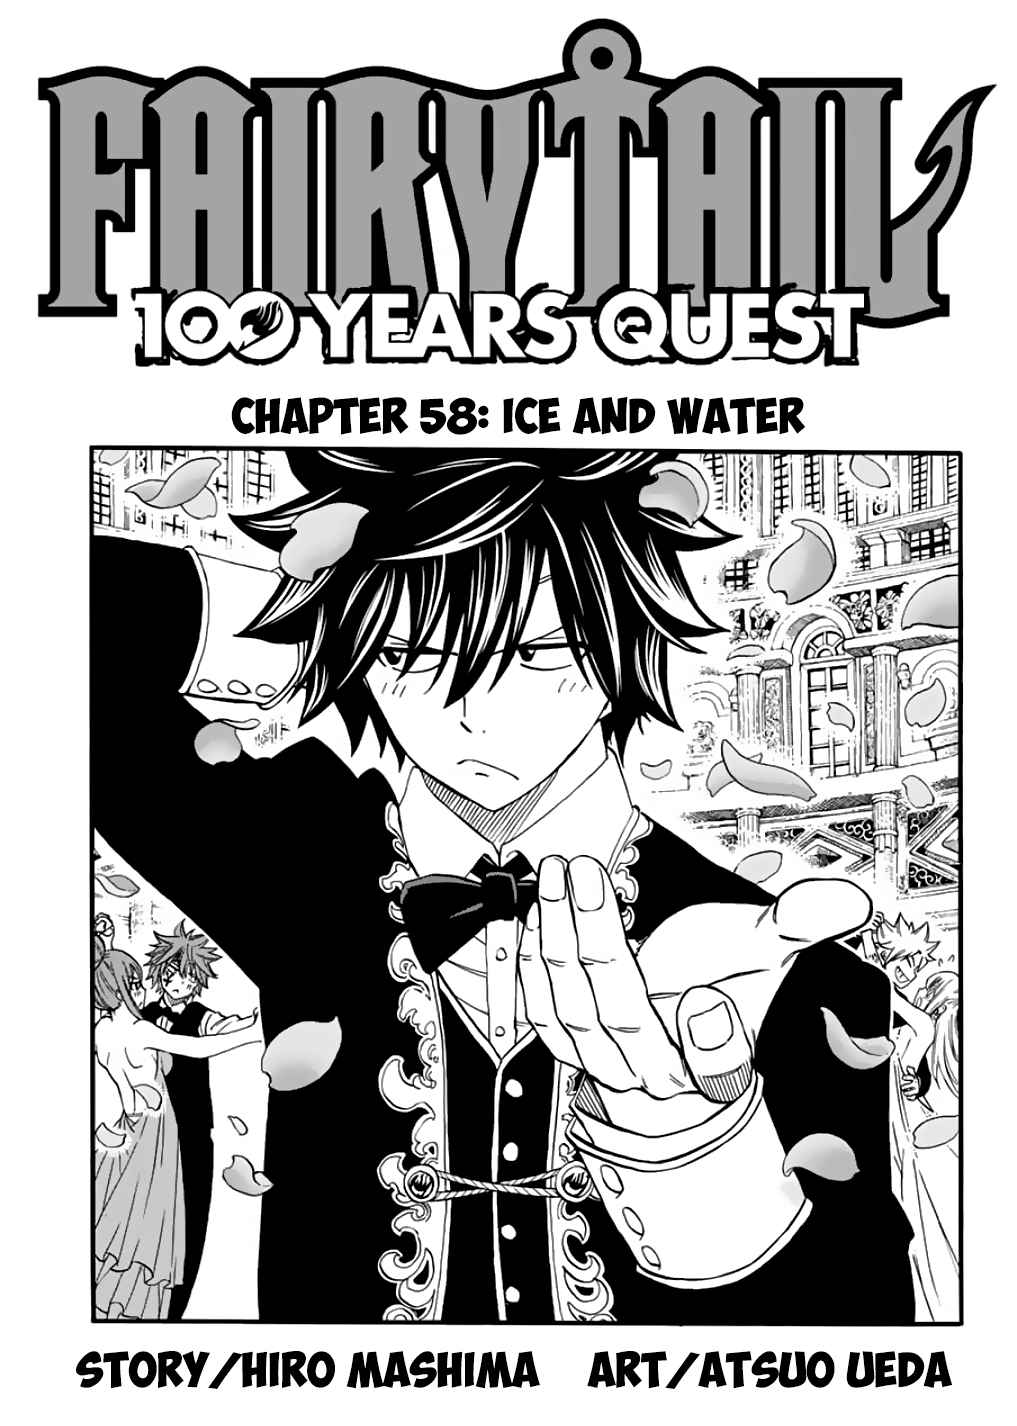 Fairy Tail: 100 Years Quest Ch. 58 Ice and Water